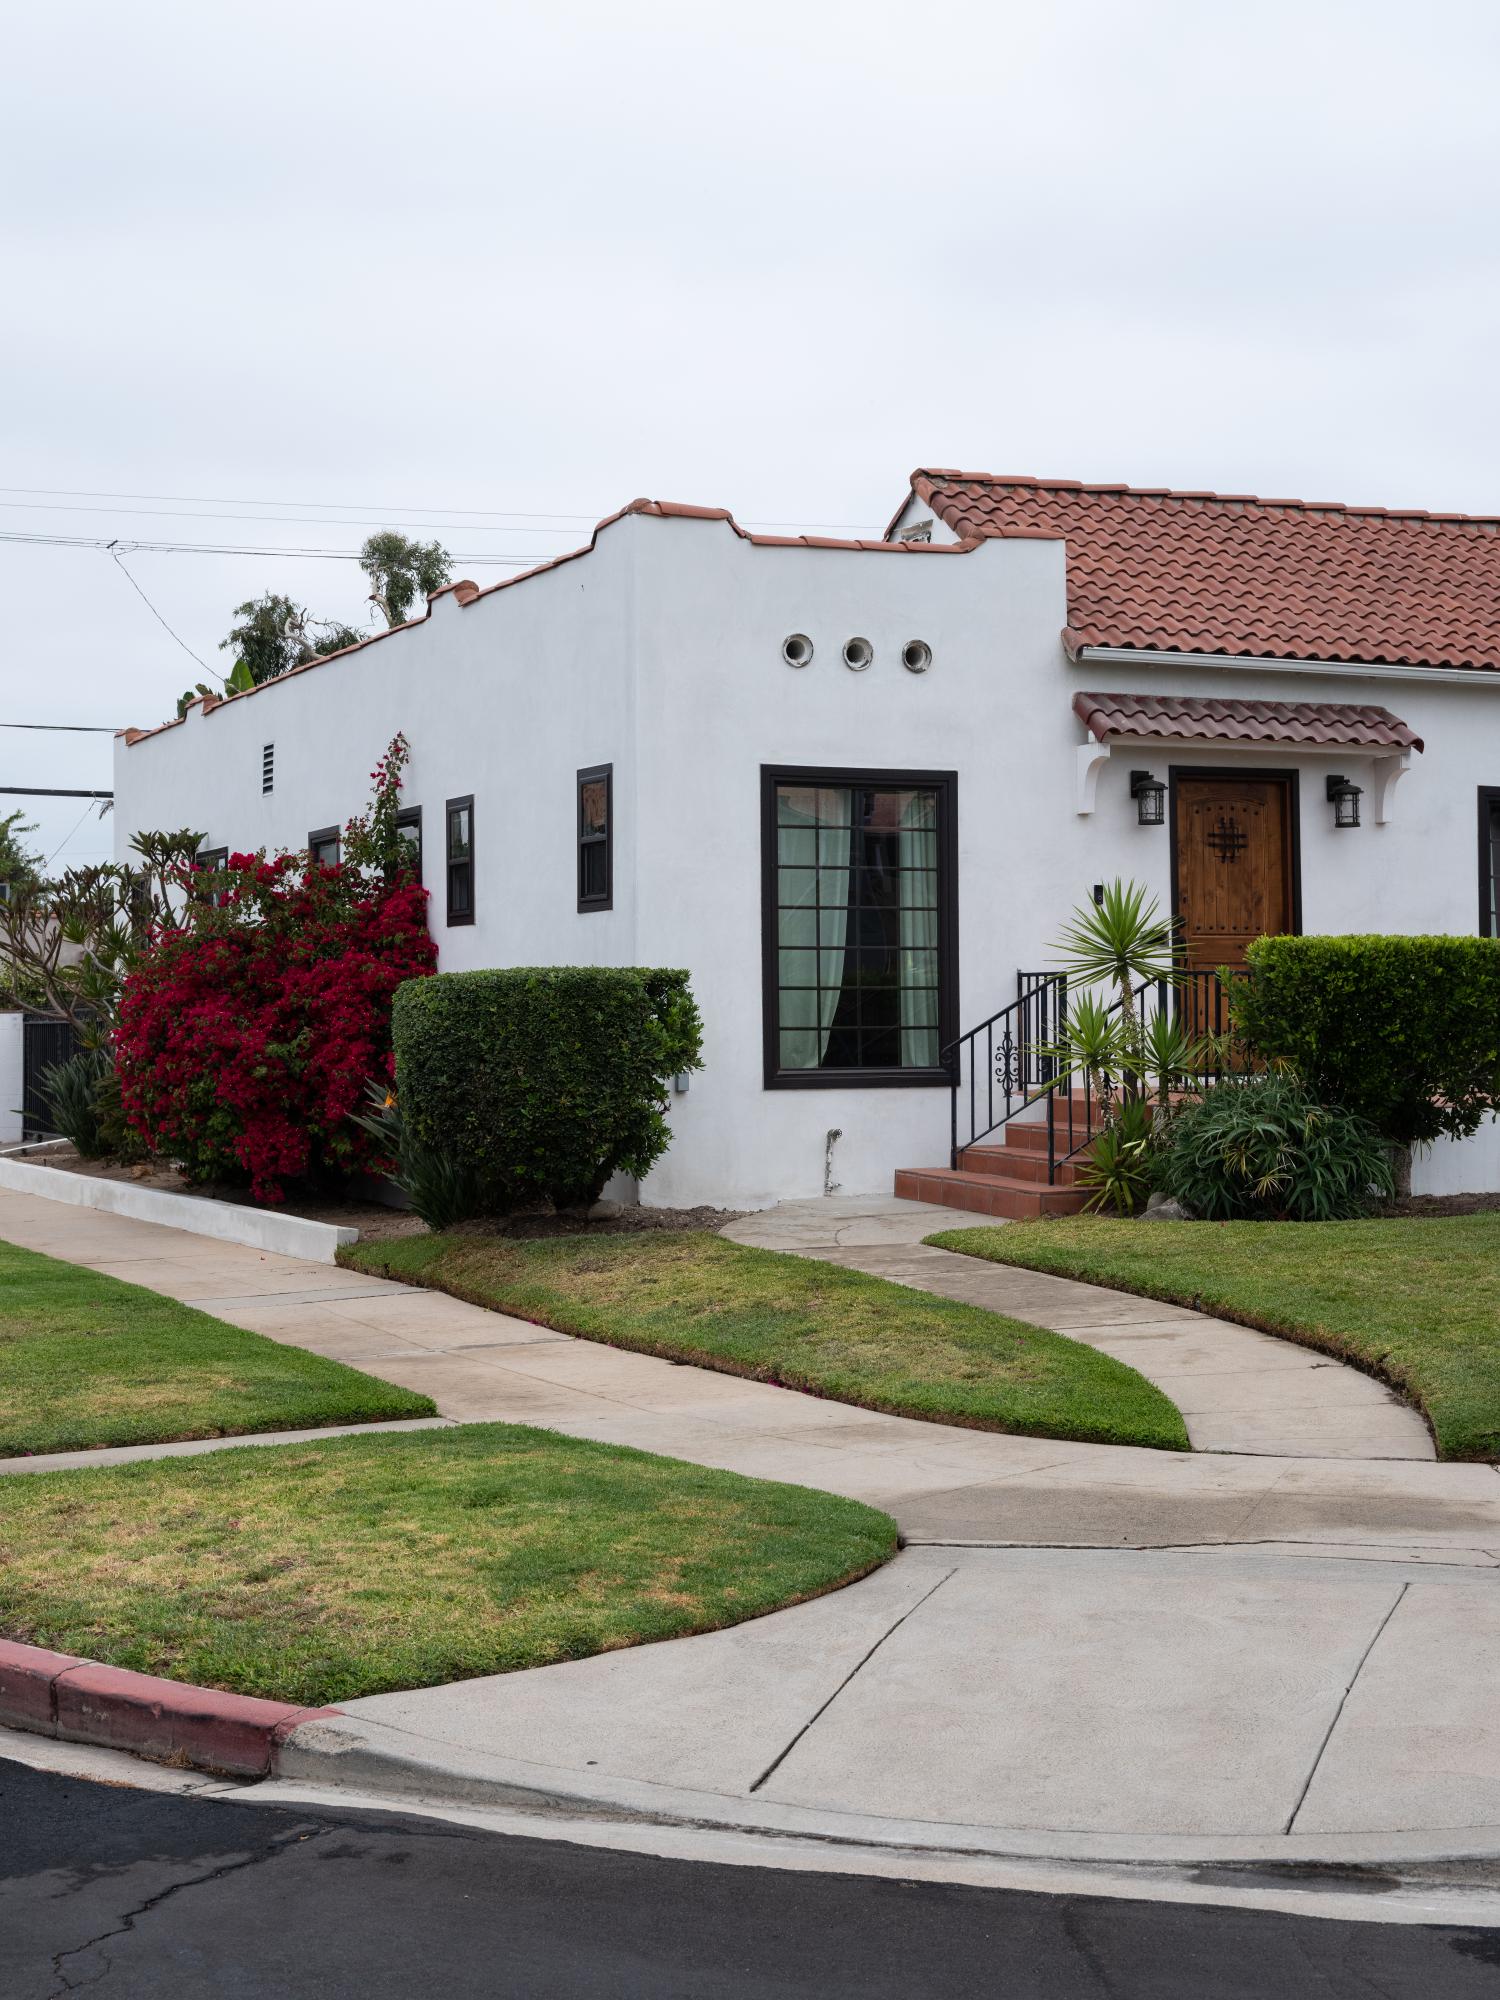 Water Cops - Wall Street Journal - A home in the mid-Wilshire neighborhood of Los Angeles,...